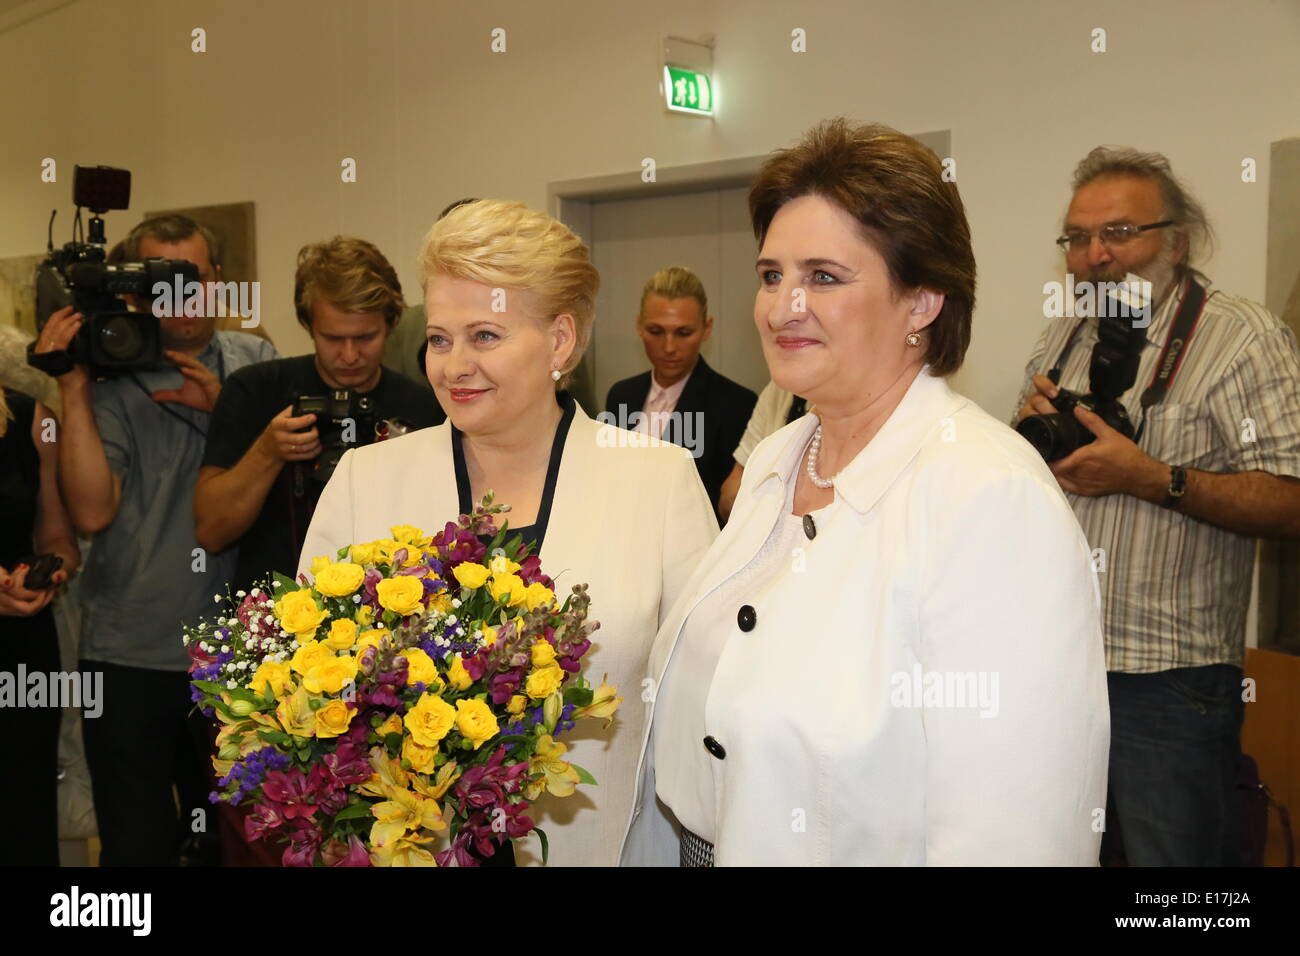 Vilnius. 26th May, 2014. Lithuanian President Dalia Grybauskaite (L) takes photo with speaker of Lithuanian Seimas Loreta Grauziniene in Vilnius, Lithuania on May 26, 2014. Lithuanian President Dalia Grybauskaite retained her post as she beat social democratic contender Zigmantas Balcytis in a runoff, according to preliminary results released by Central Electoral Commission early Monday. Credit:  Bu Peng/Xinhua/Alamy Live News Stock Photo